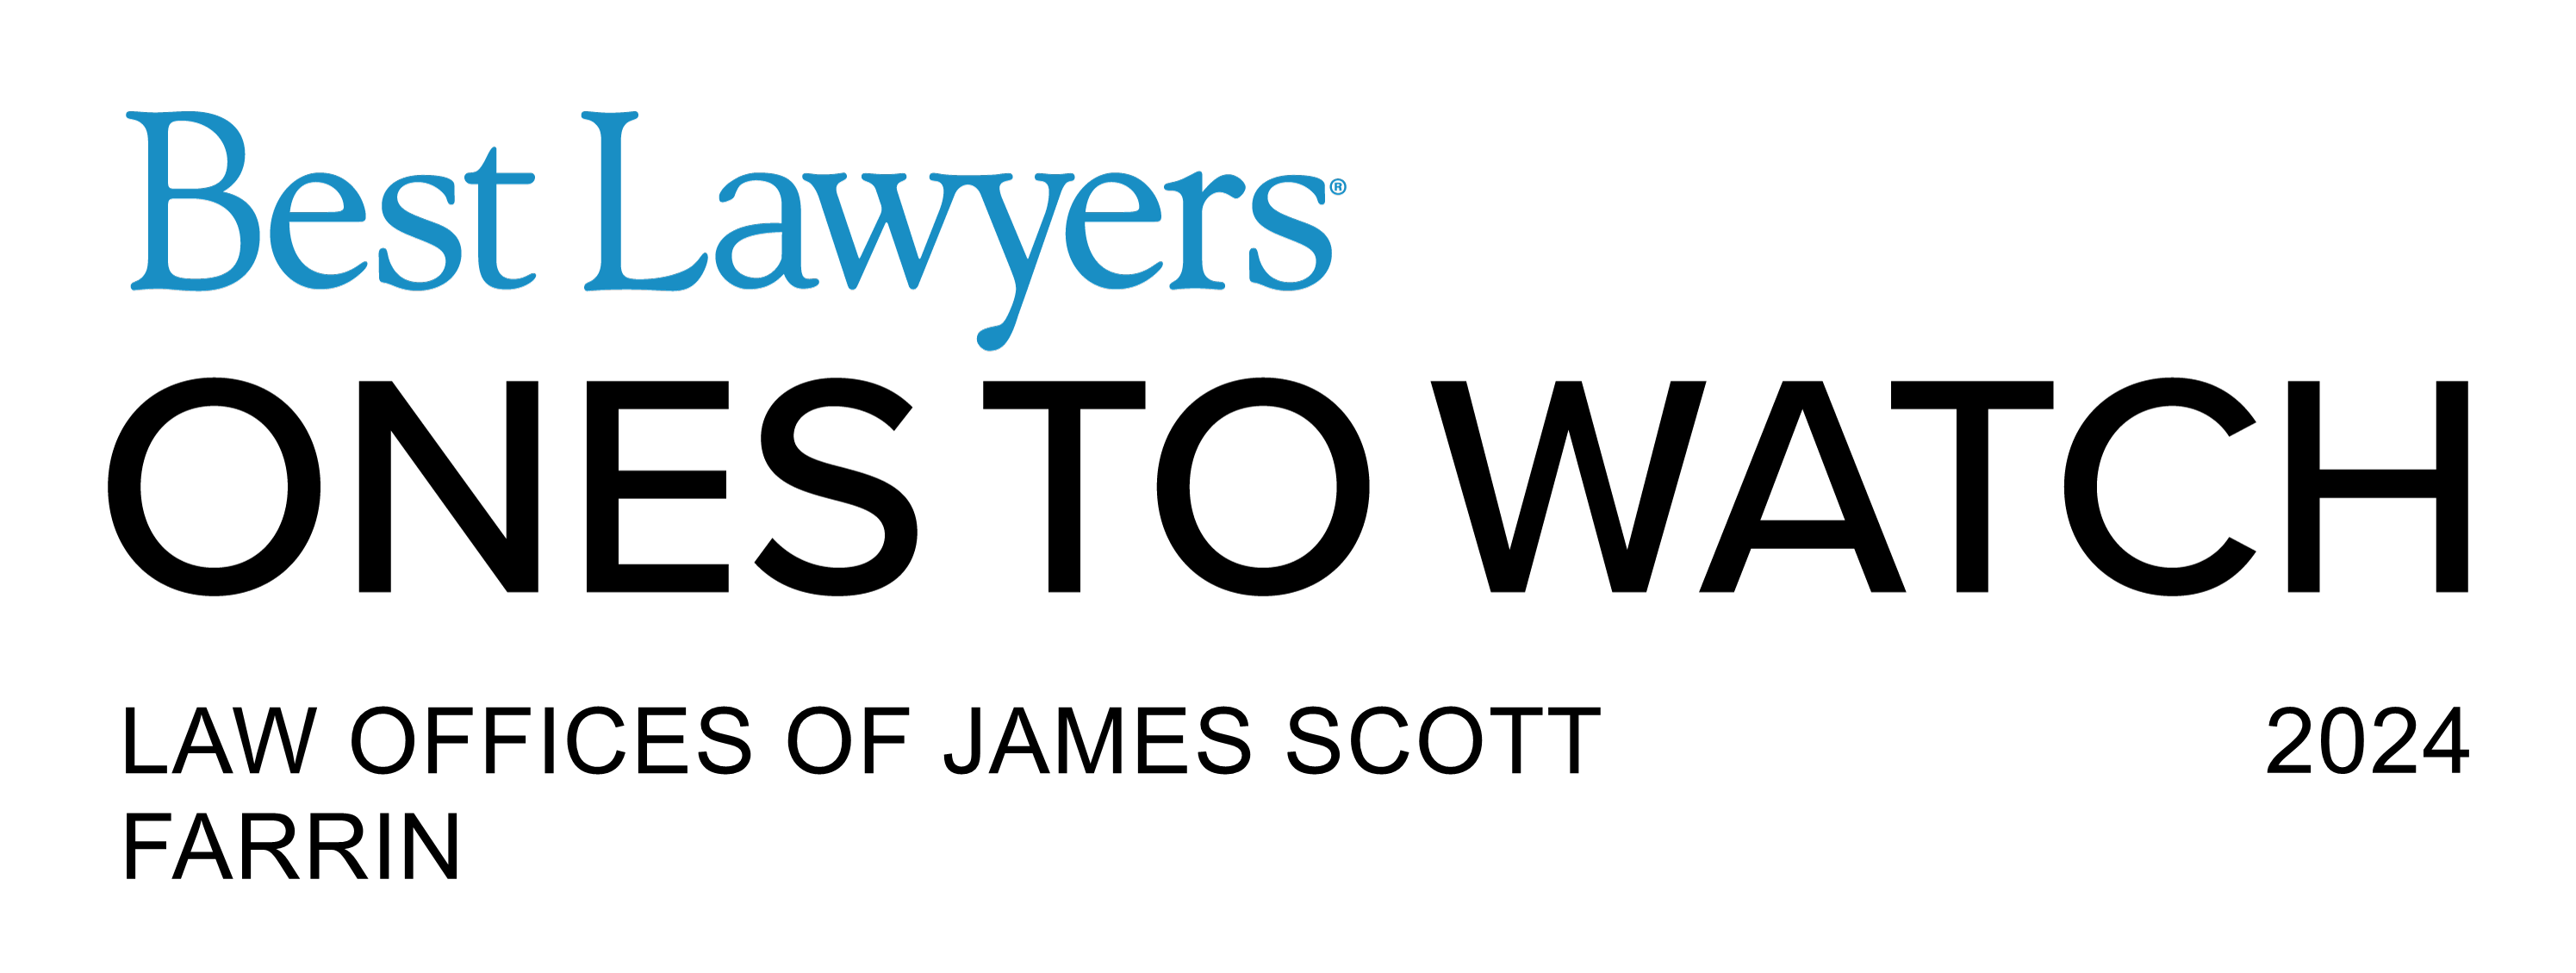 Best Lawyers Ones to Watch Logo 2024